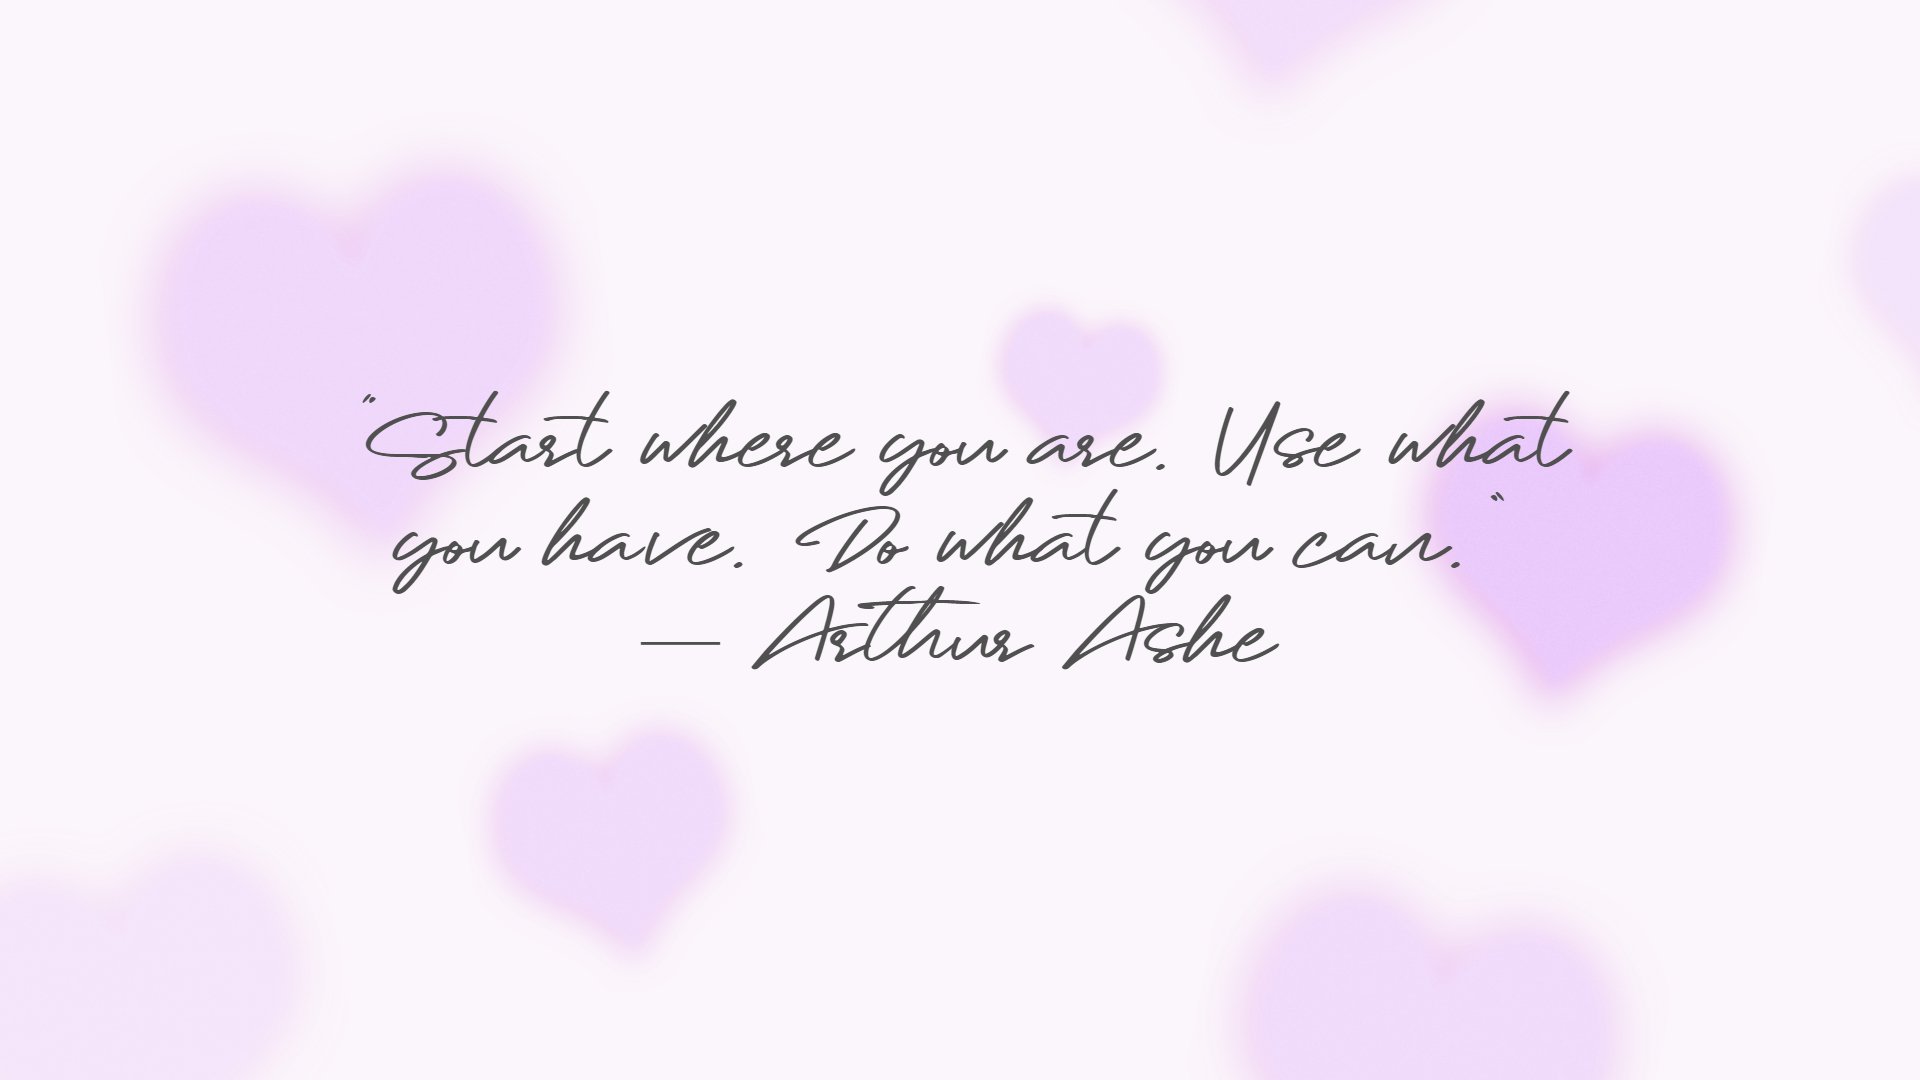 the monday motivation quote from Arthur Ashe on the desktop wallpaper with gradient purple hearts